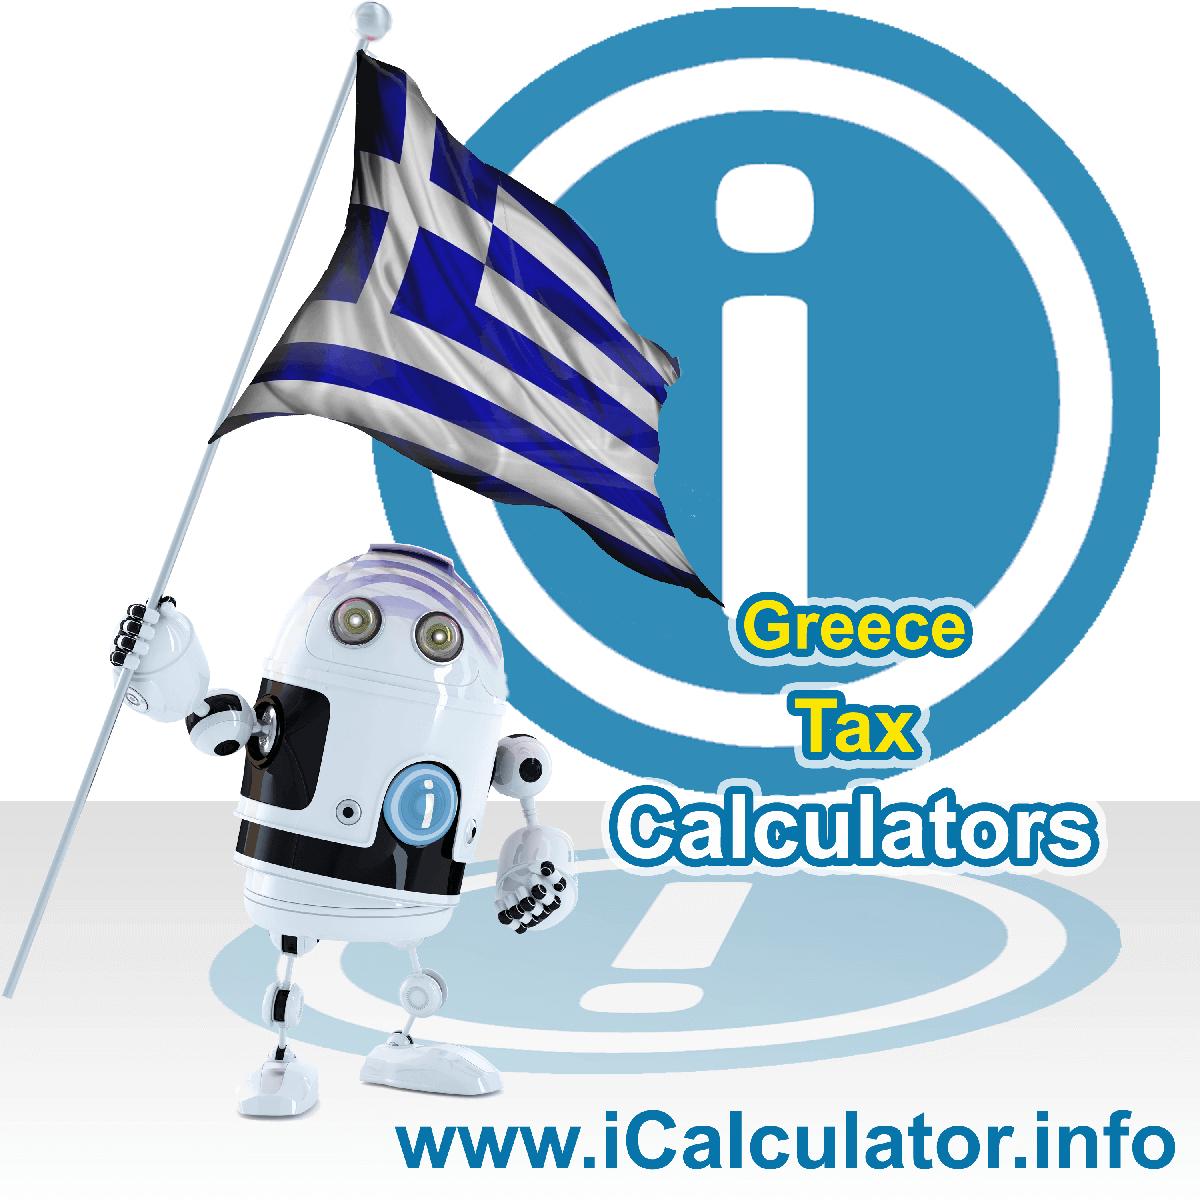 Greece Wage Calculator. This image shows the Greece flag and information relating to the tax formula for the Greece Tax Calculator